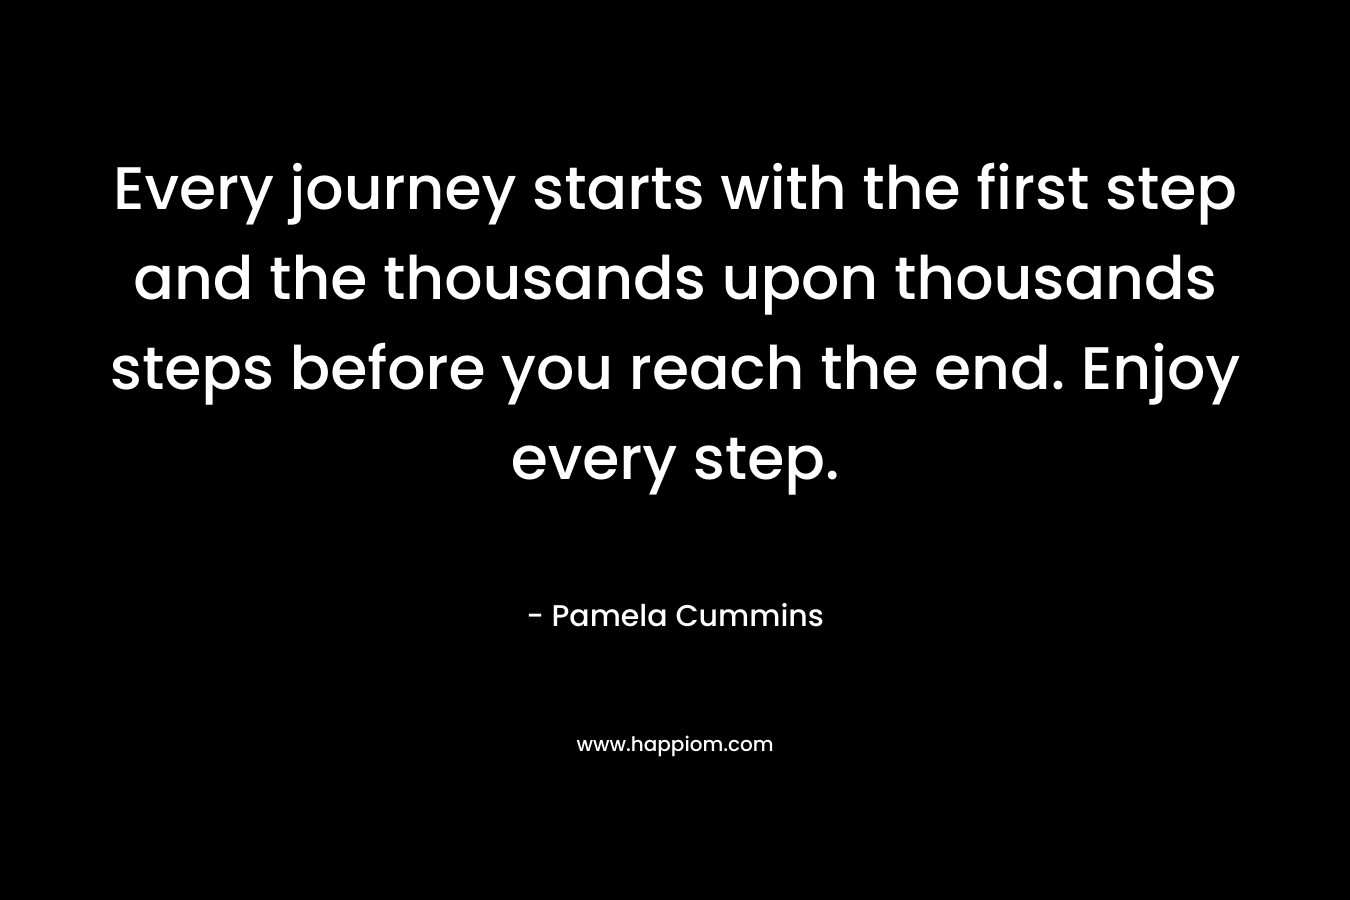 Every journey starts with the first step and the thousands upon thousands steps before you reach the end. Enjoy every step.